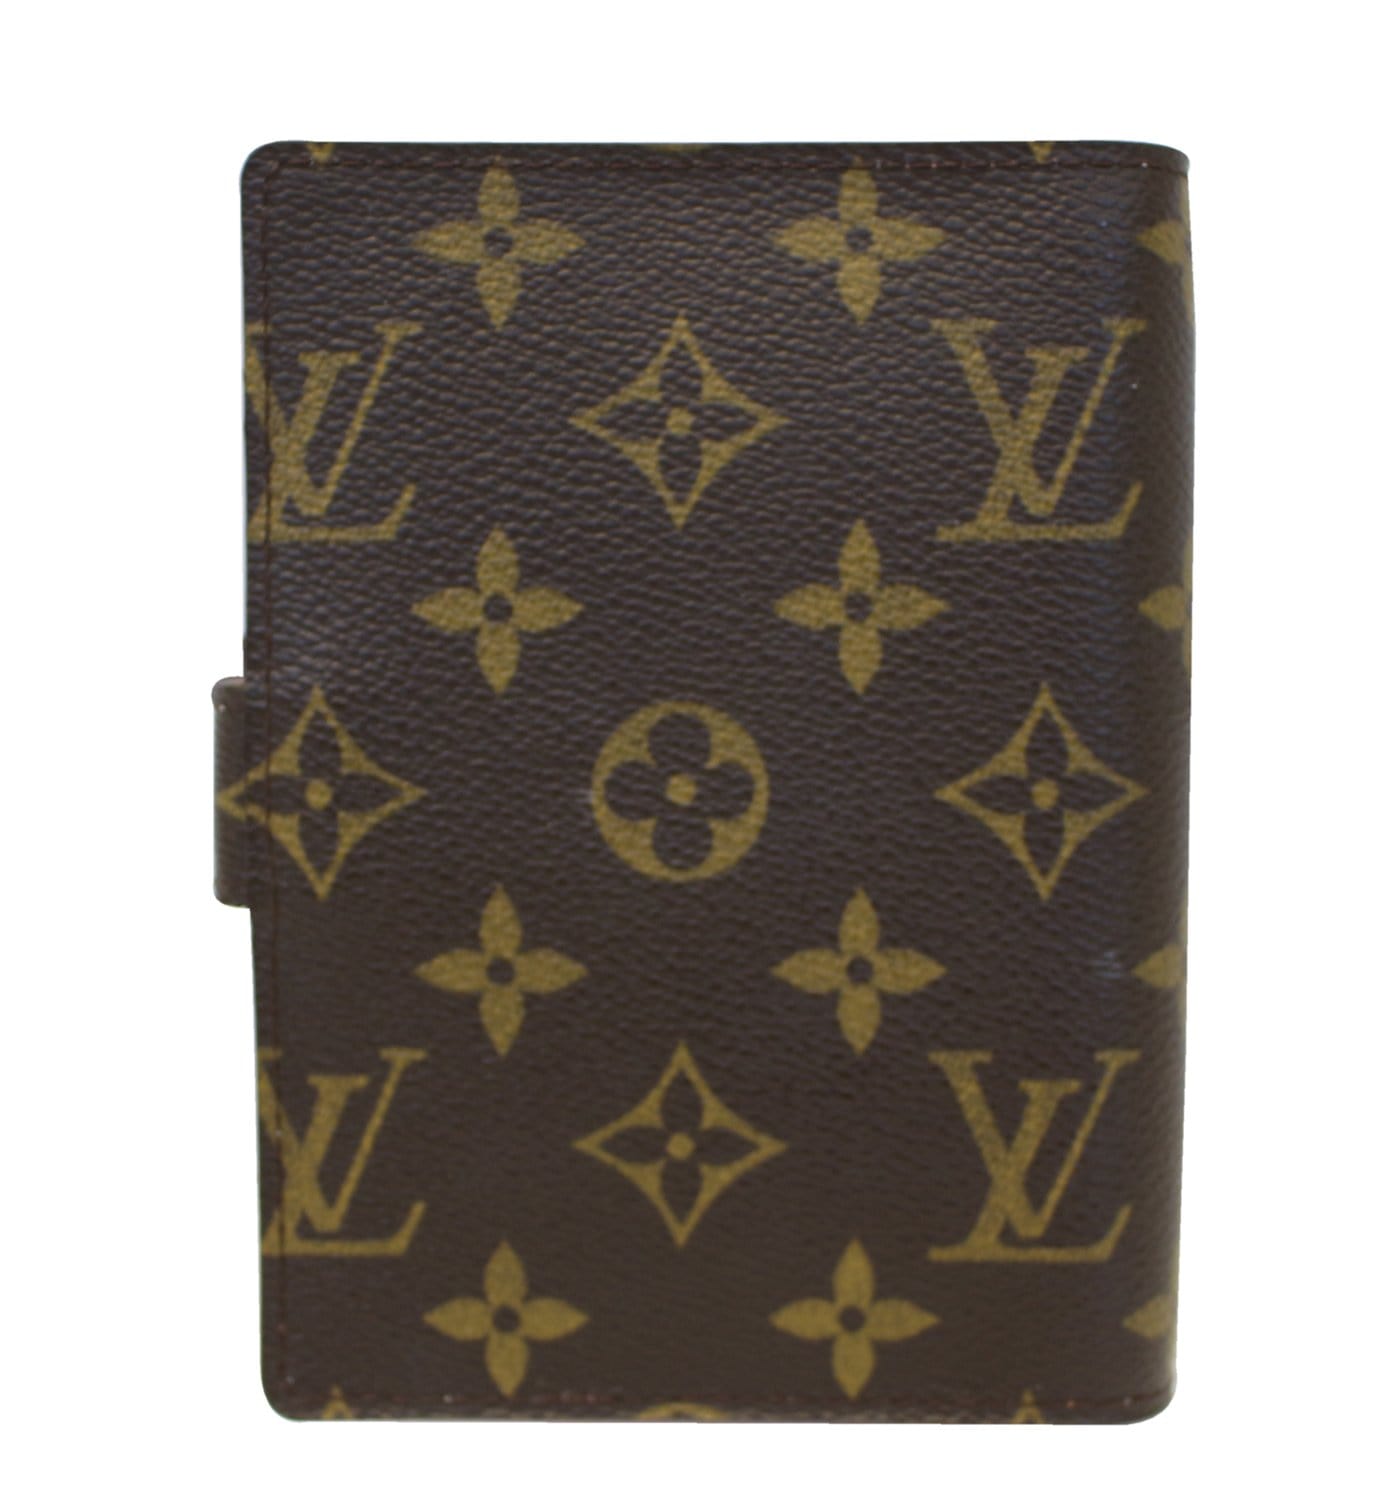 Louis Vuitton LV Passport cover limited edition Grey Cloth ref